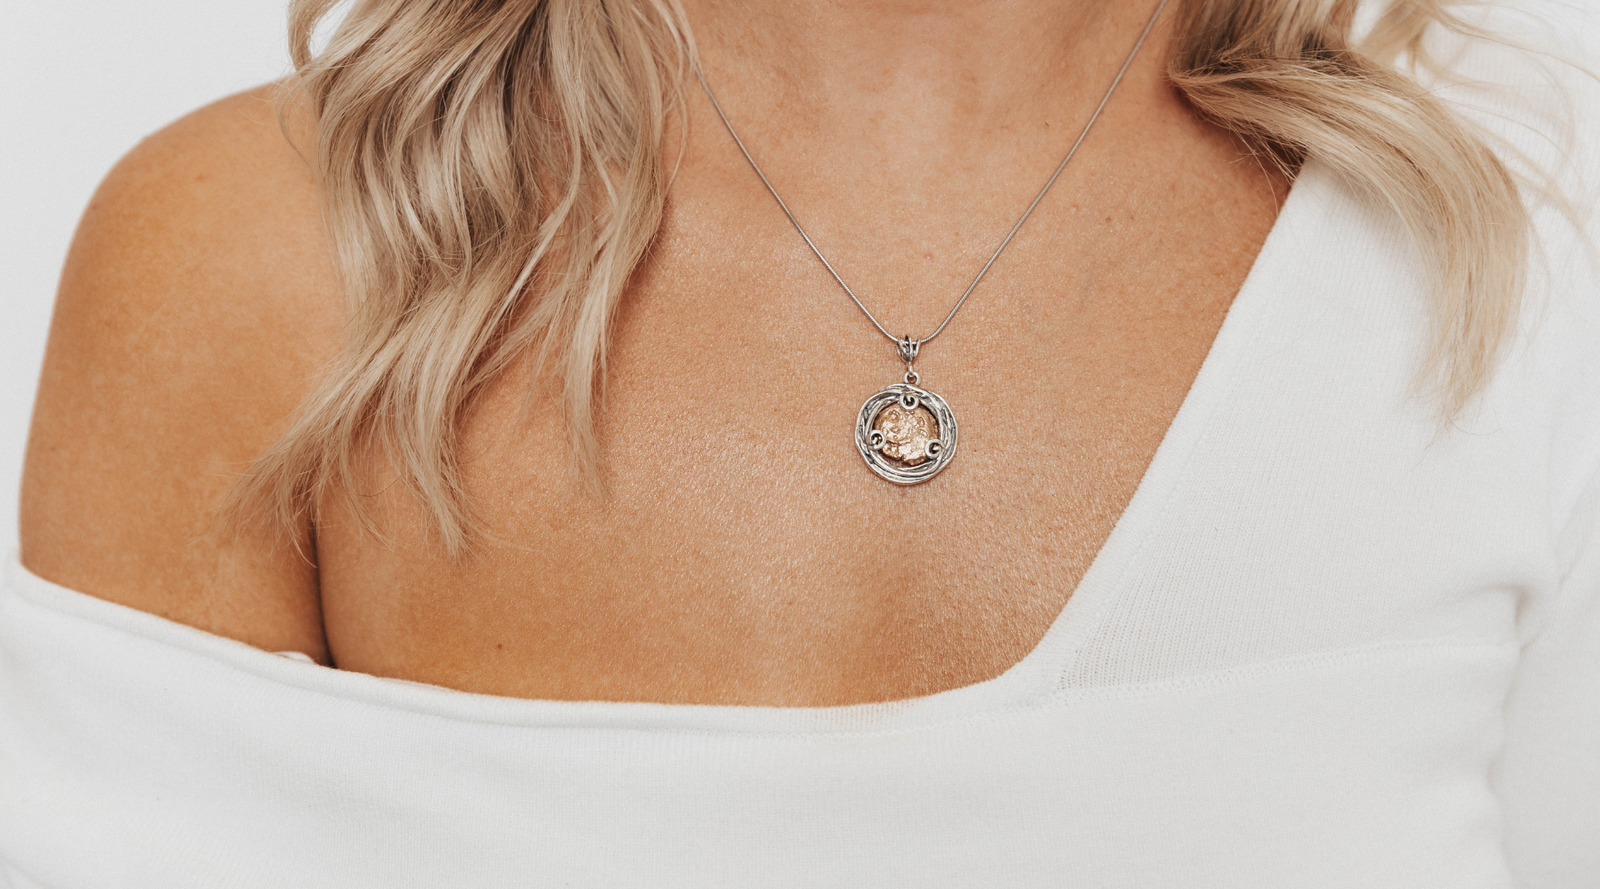 What Are the Most Popular Styles of Pendant Necklaces?